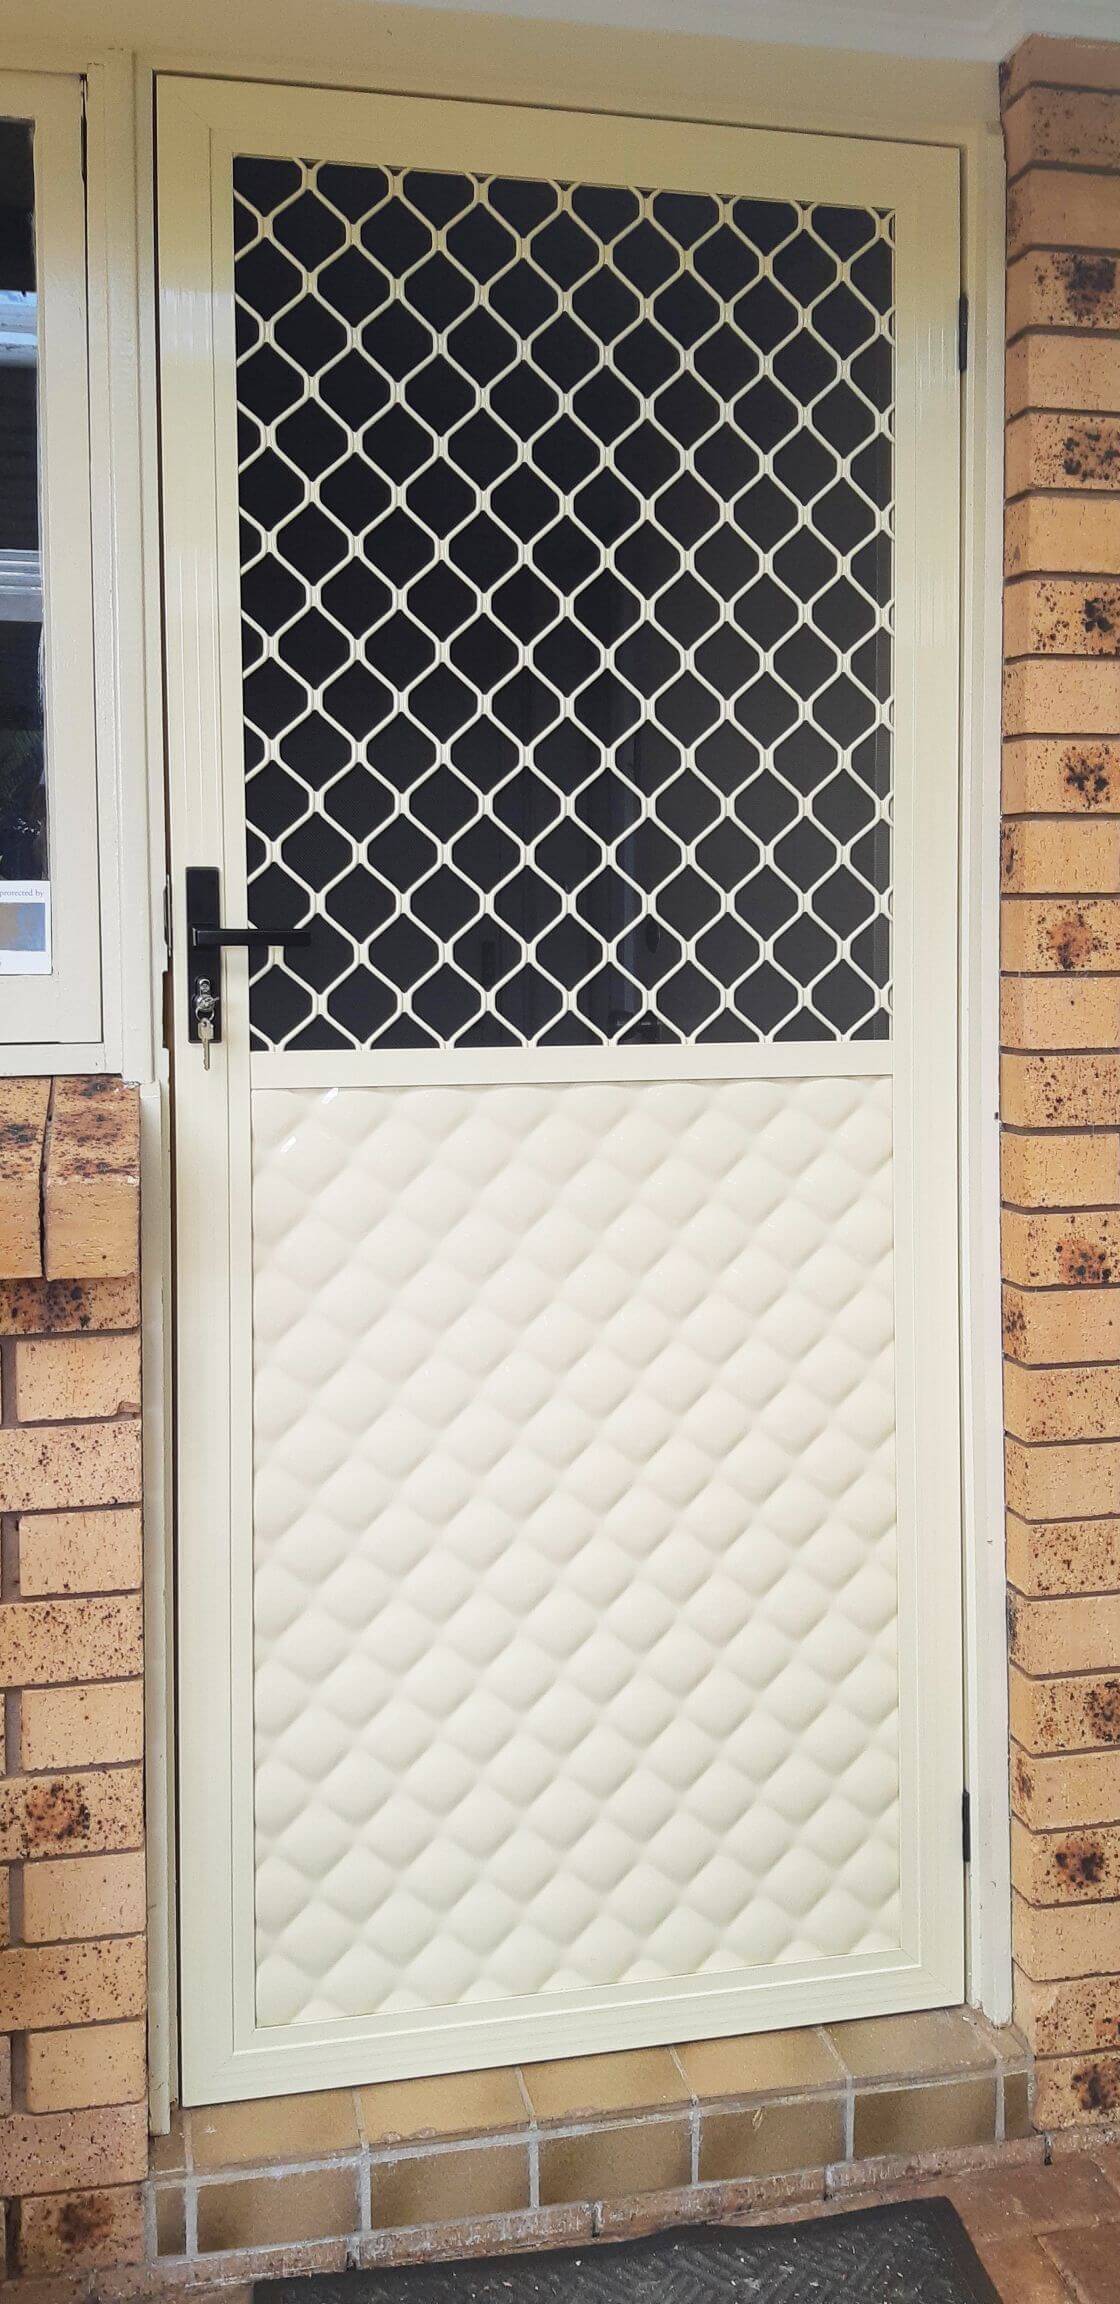 Doors Plus-External-Entrance-Nubreeze-Safety screen door with grill design on it-in primrose finish